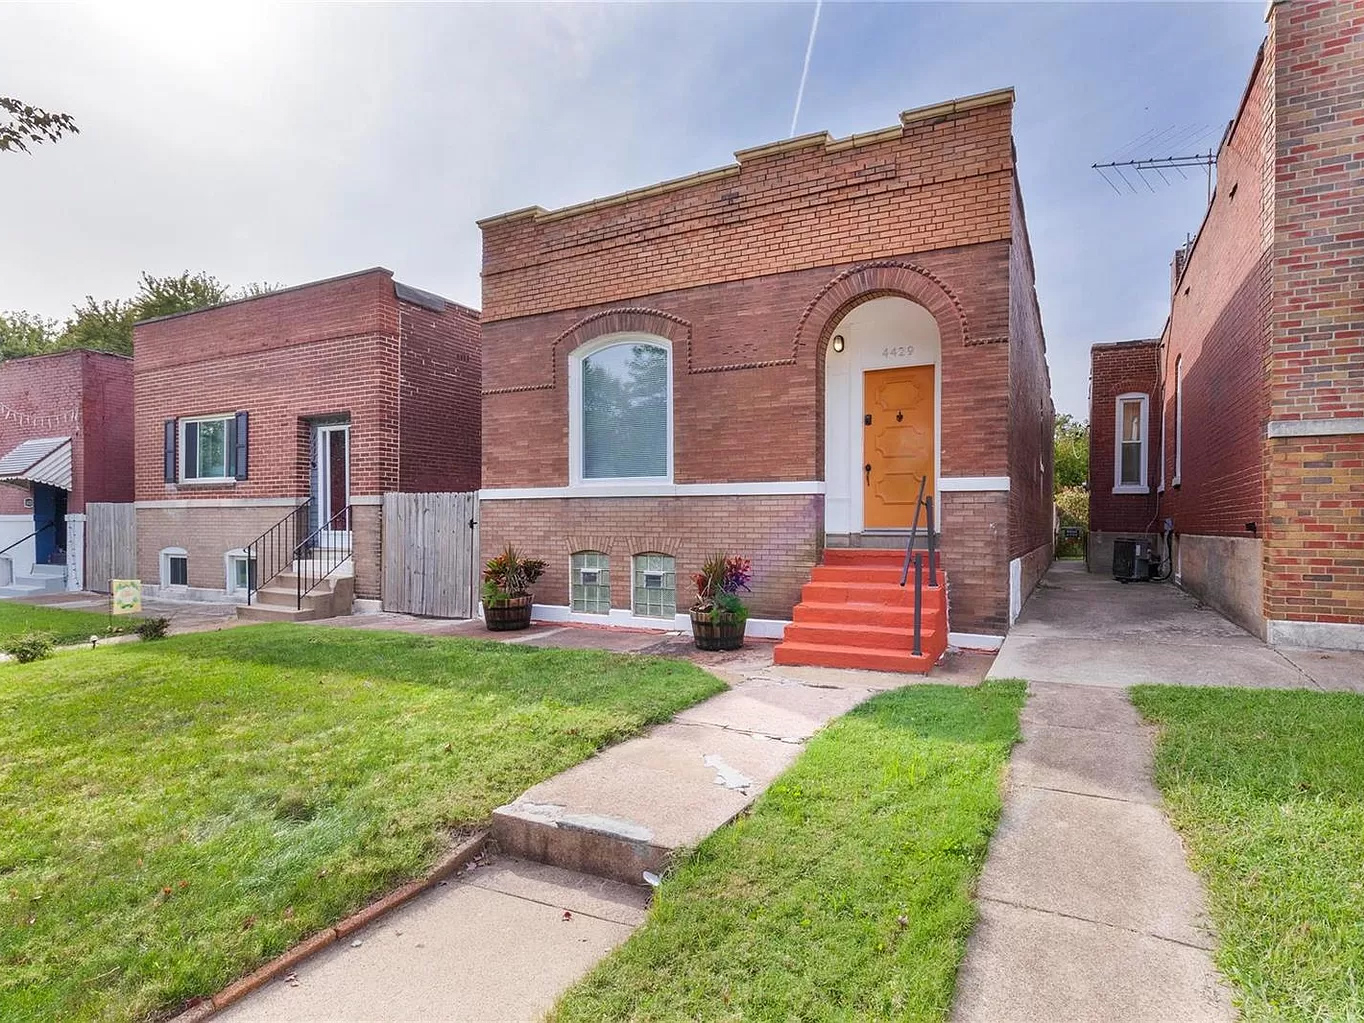 4429 Tennessee Avenue in Dutchtown, St. Louis, MO.